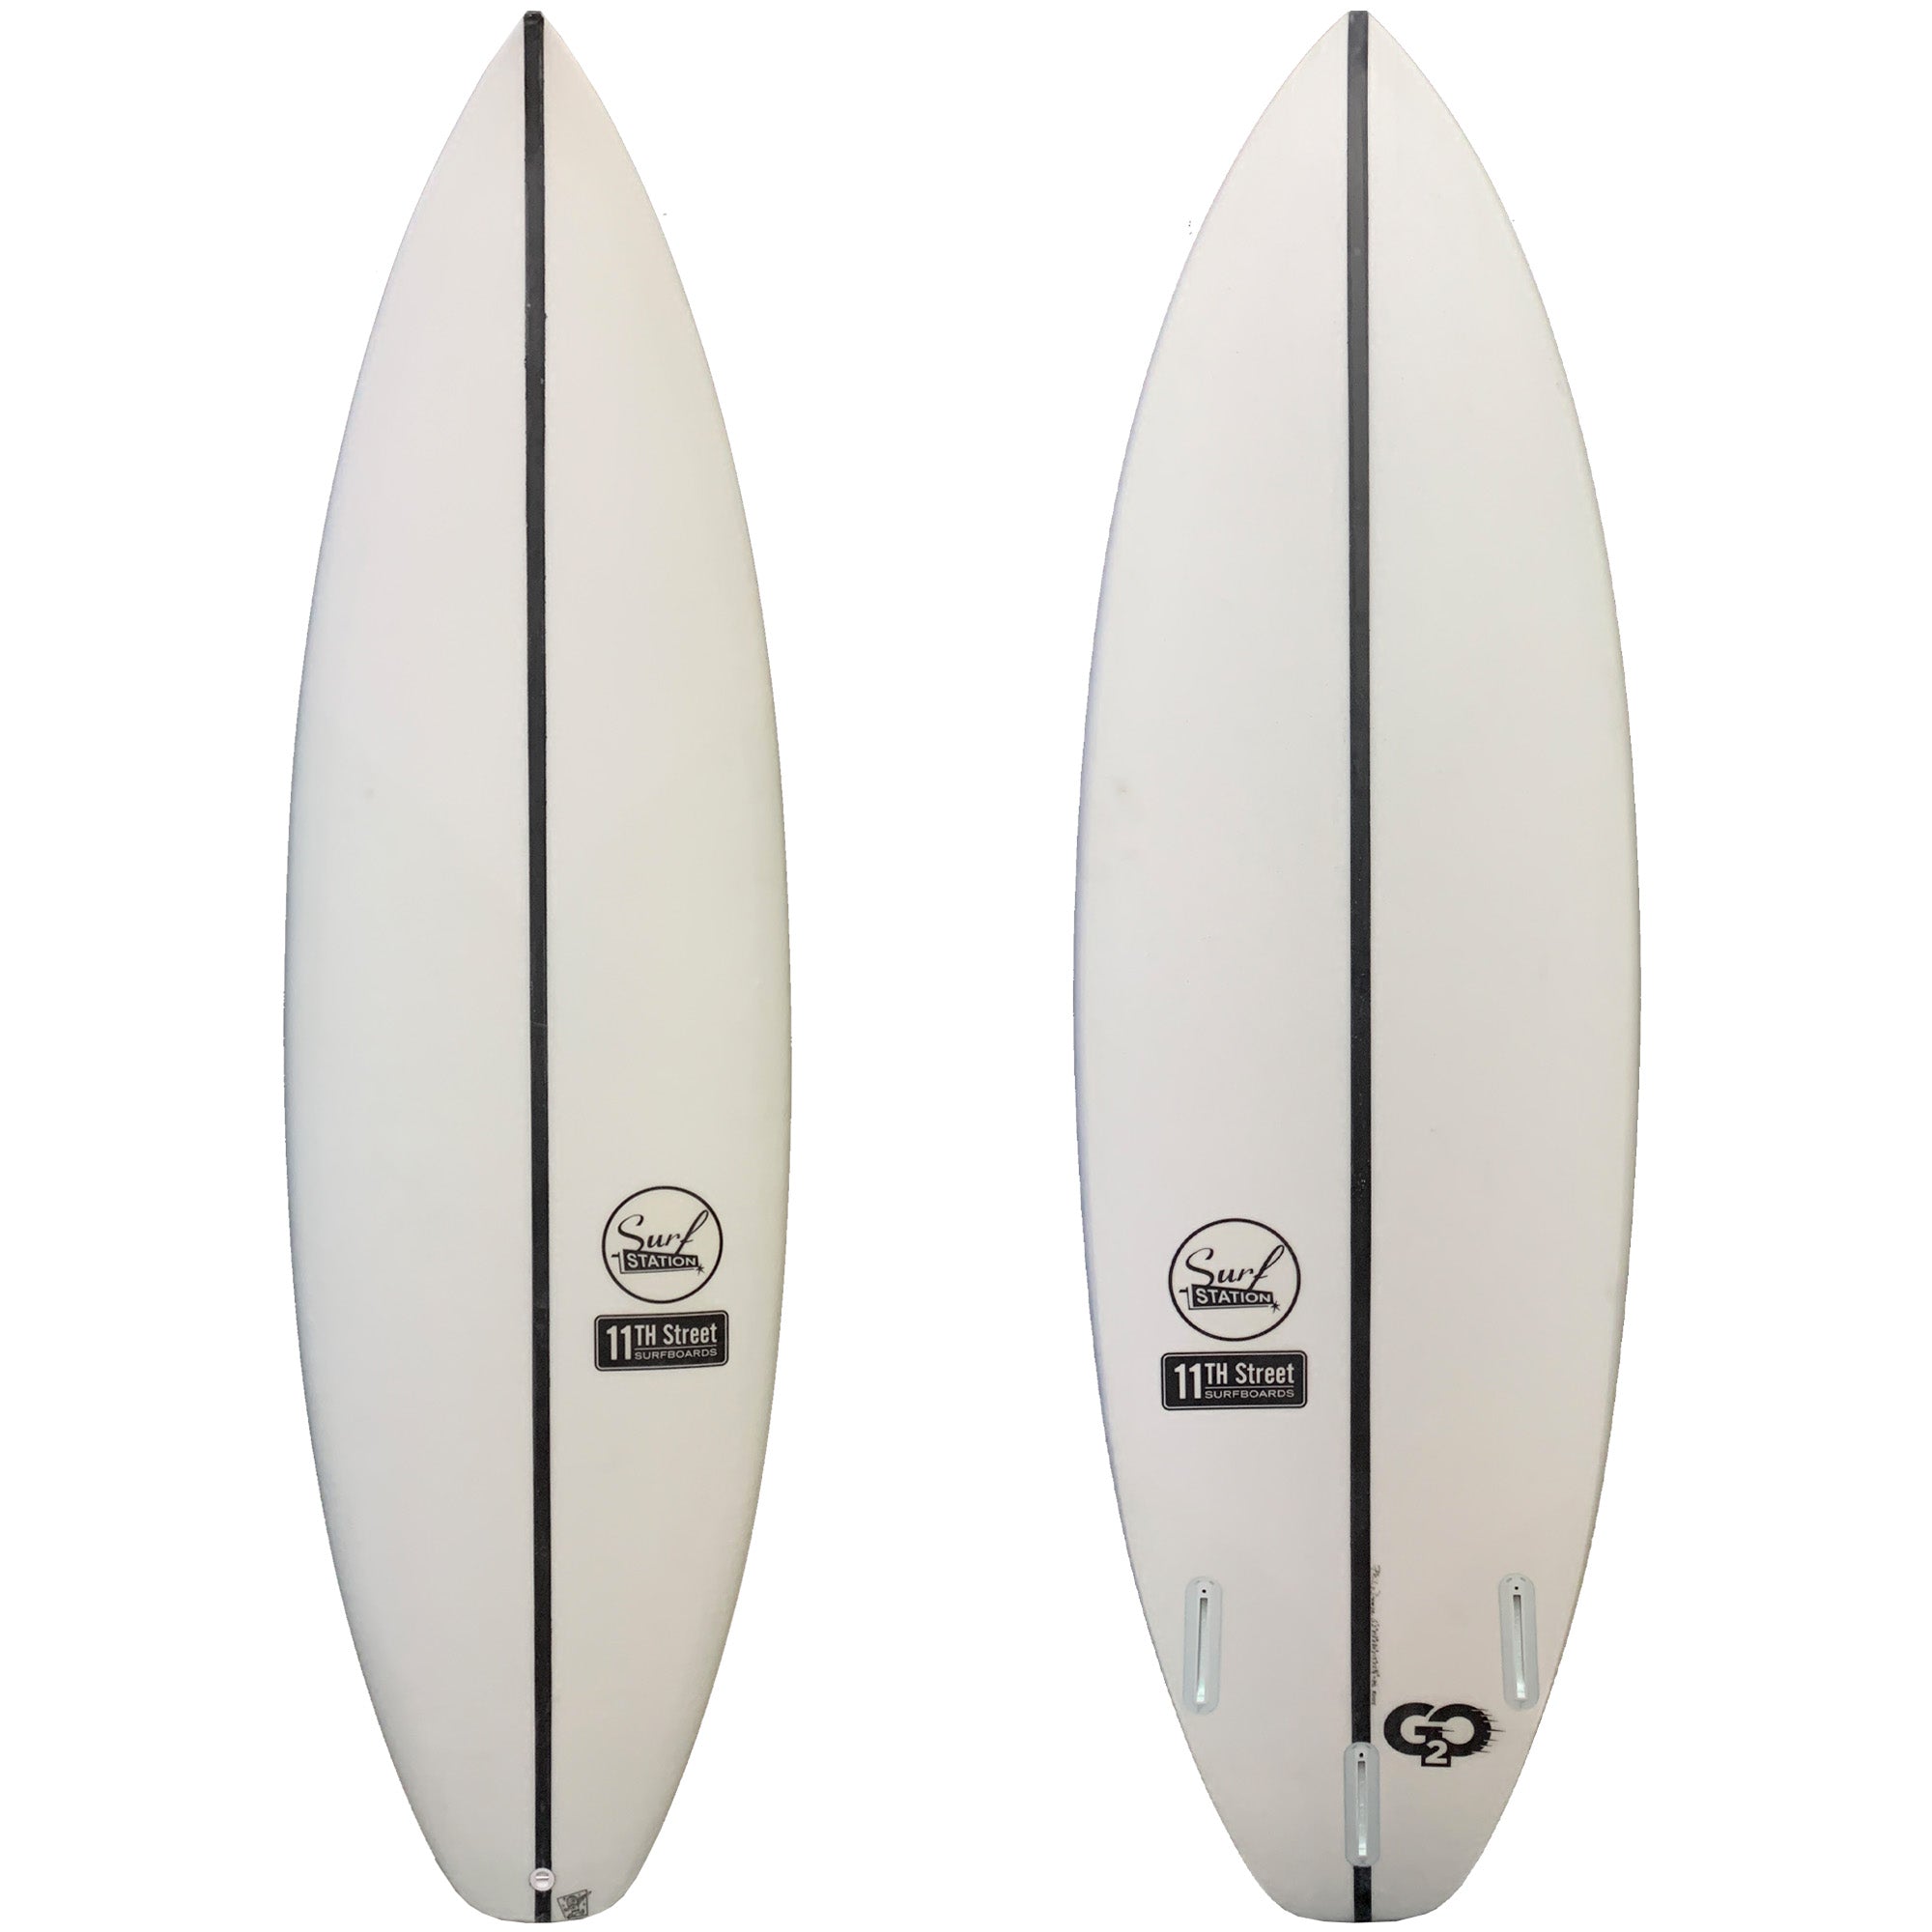 11th Street Surfboards GO2 EPS Surfboard - Futures